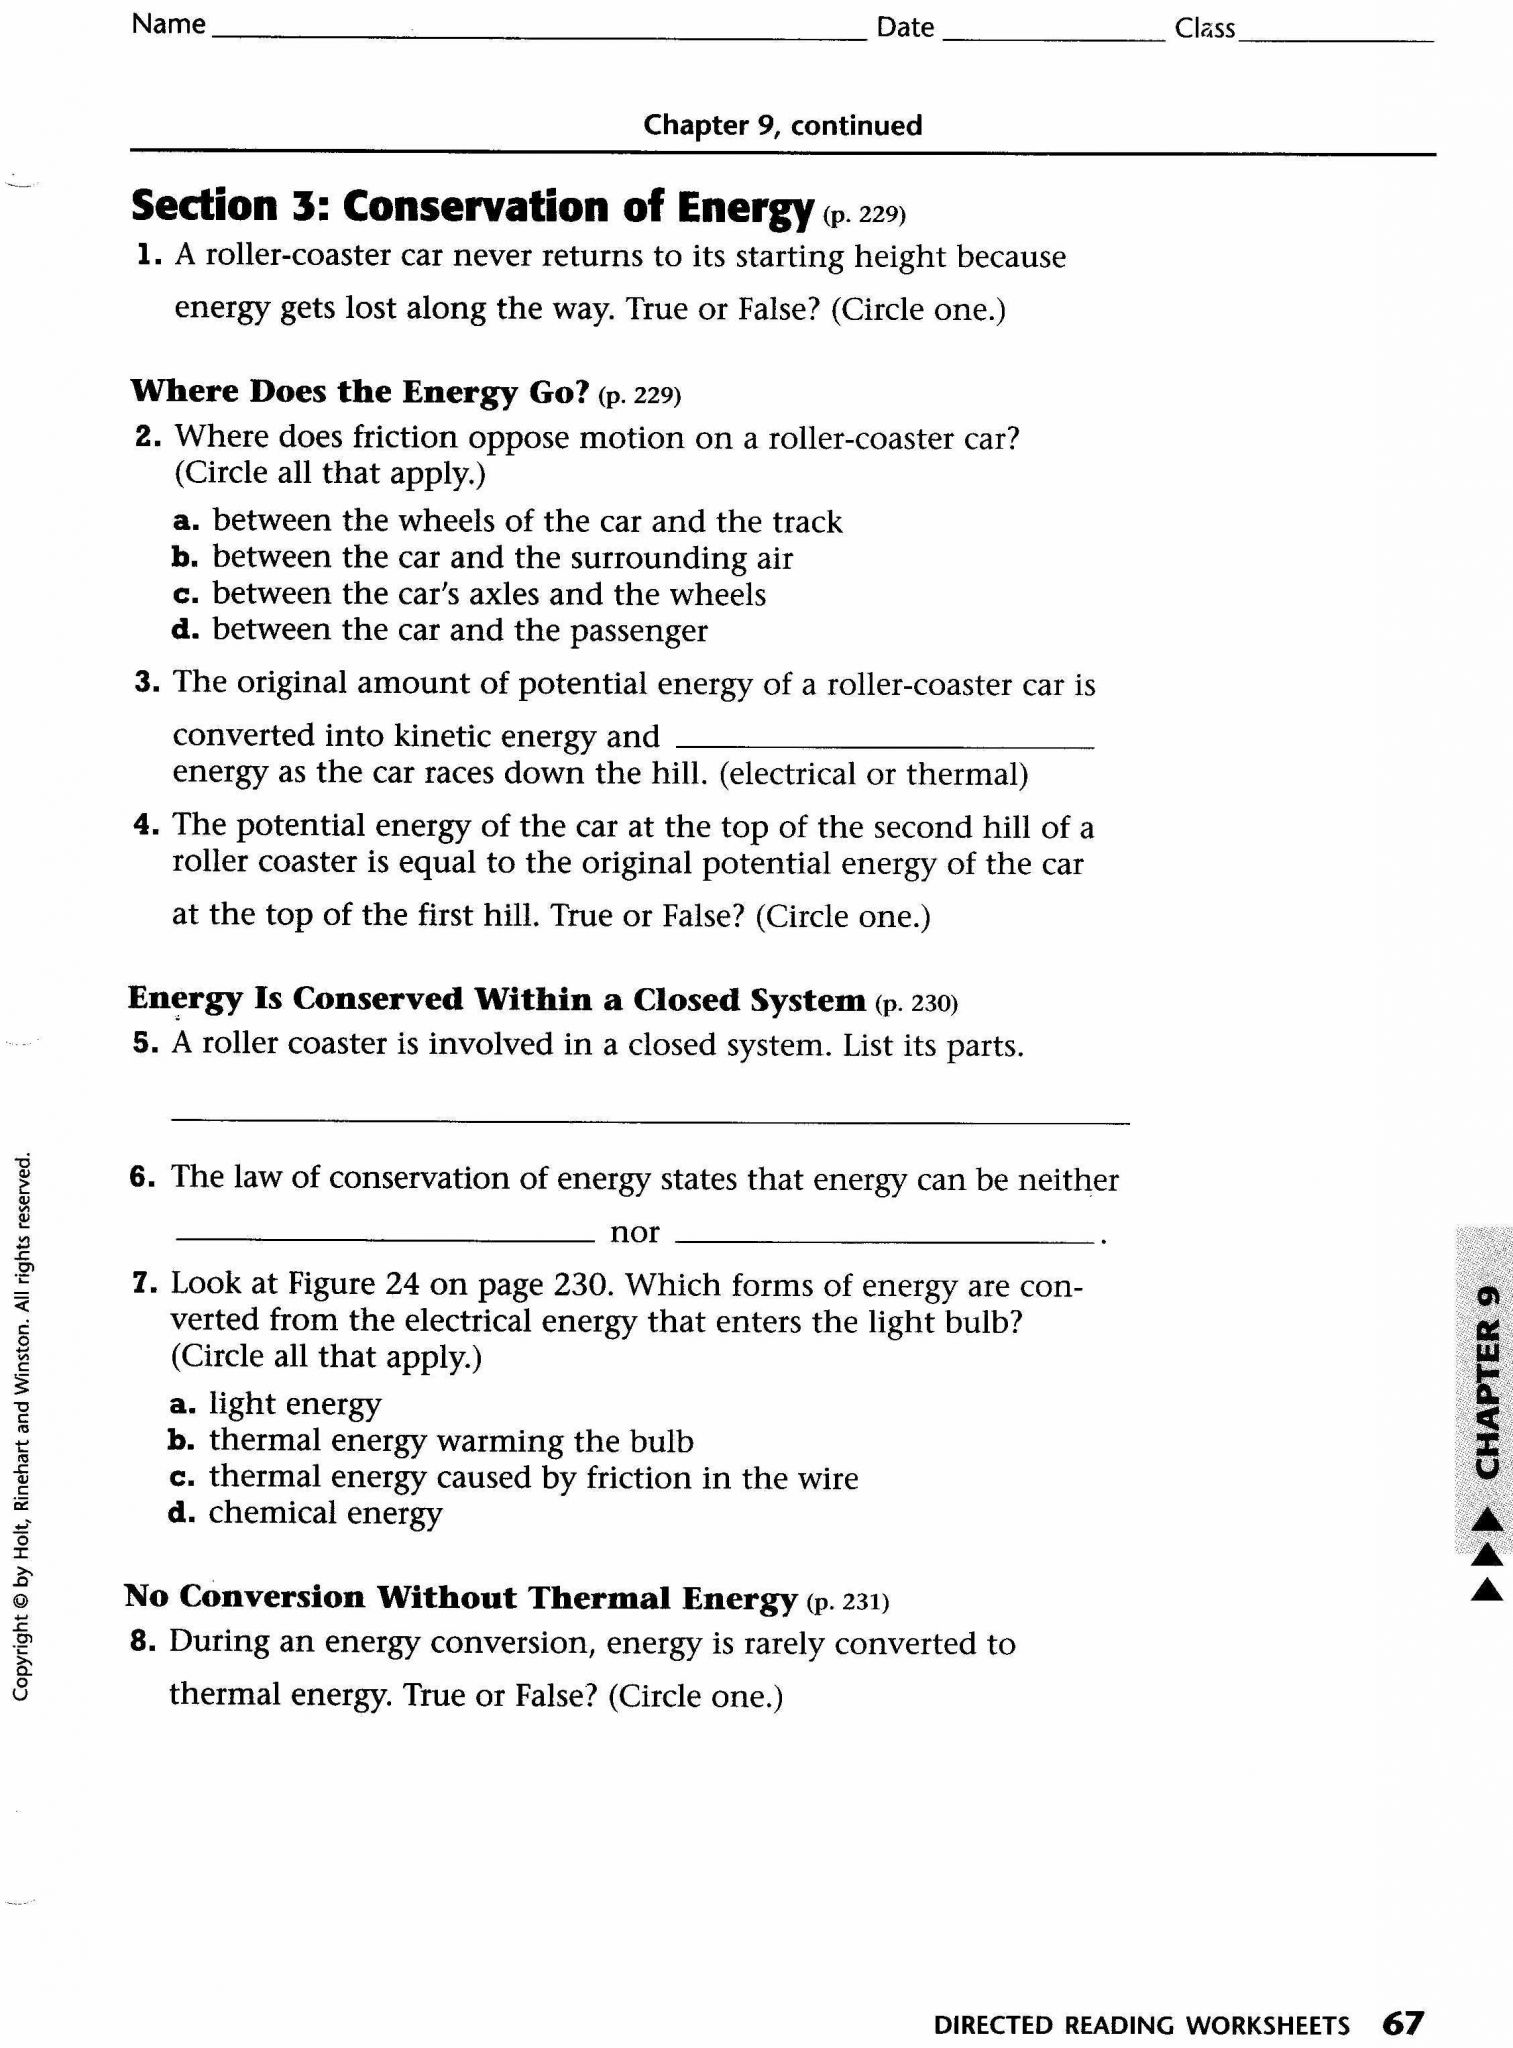 Energy Transformation Worksheet Answers with Energy Worksheet 2 Conduction Convection and Radiation Answer Key